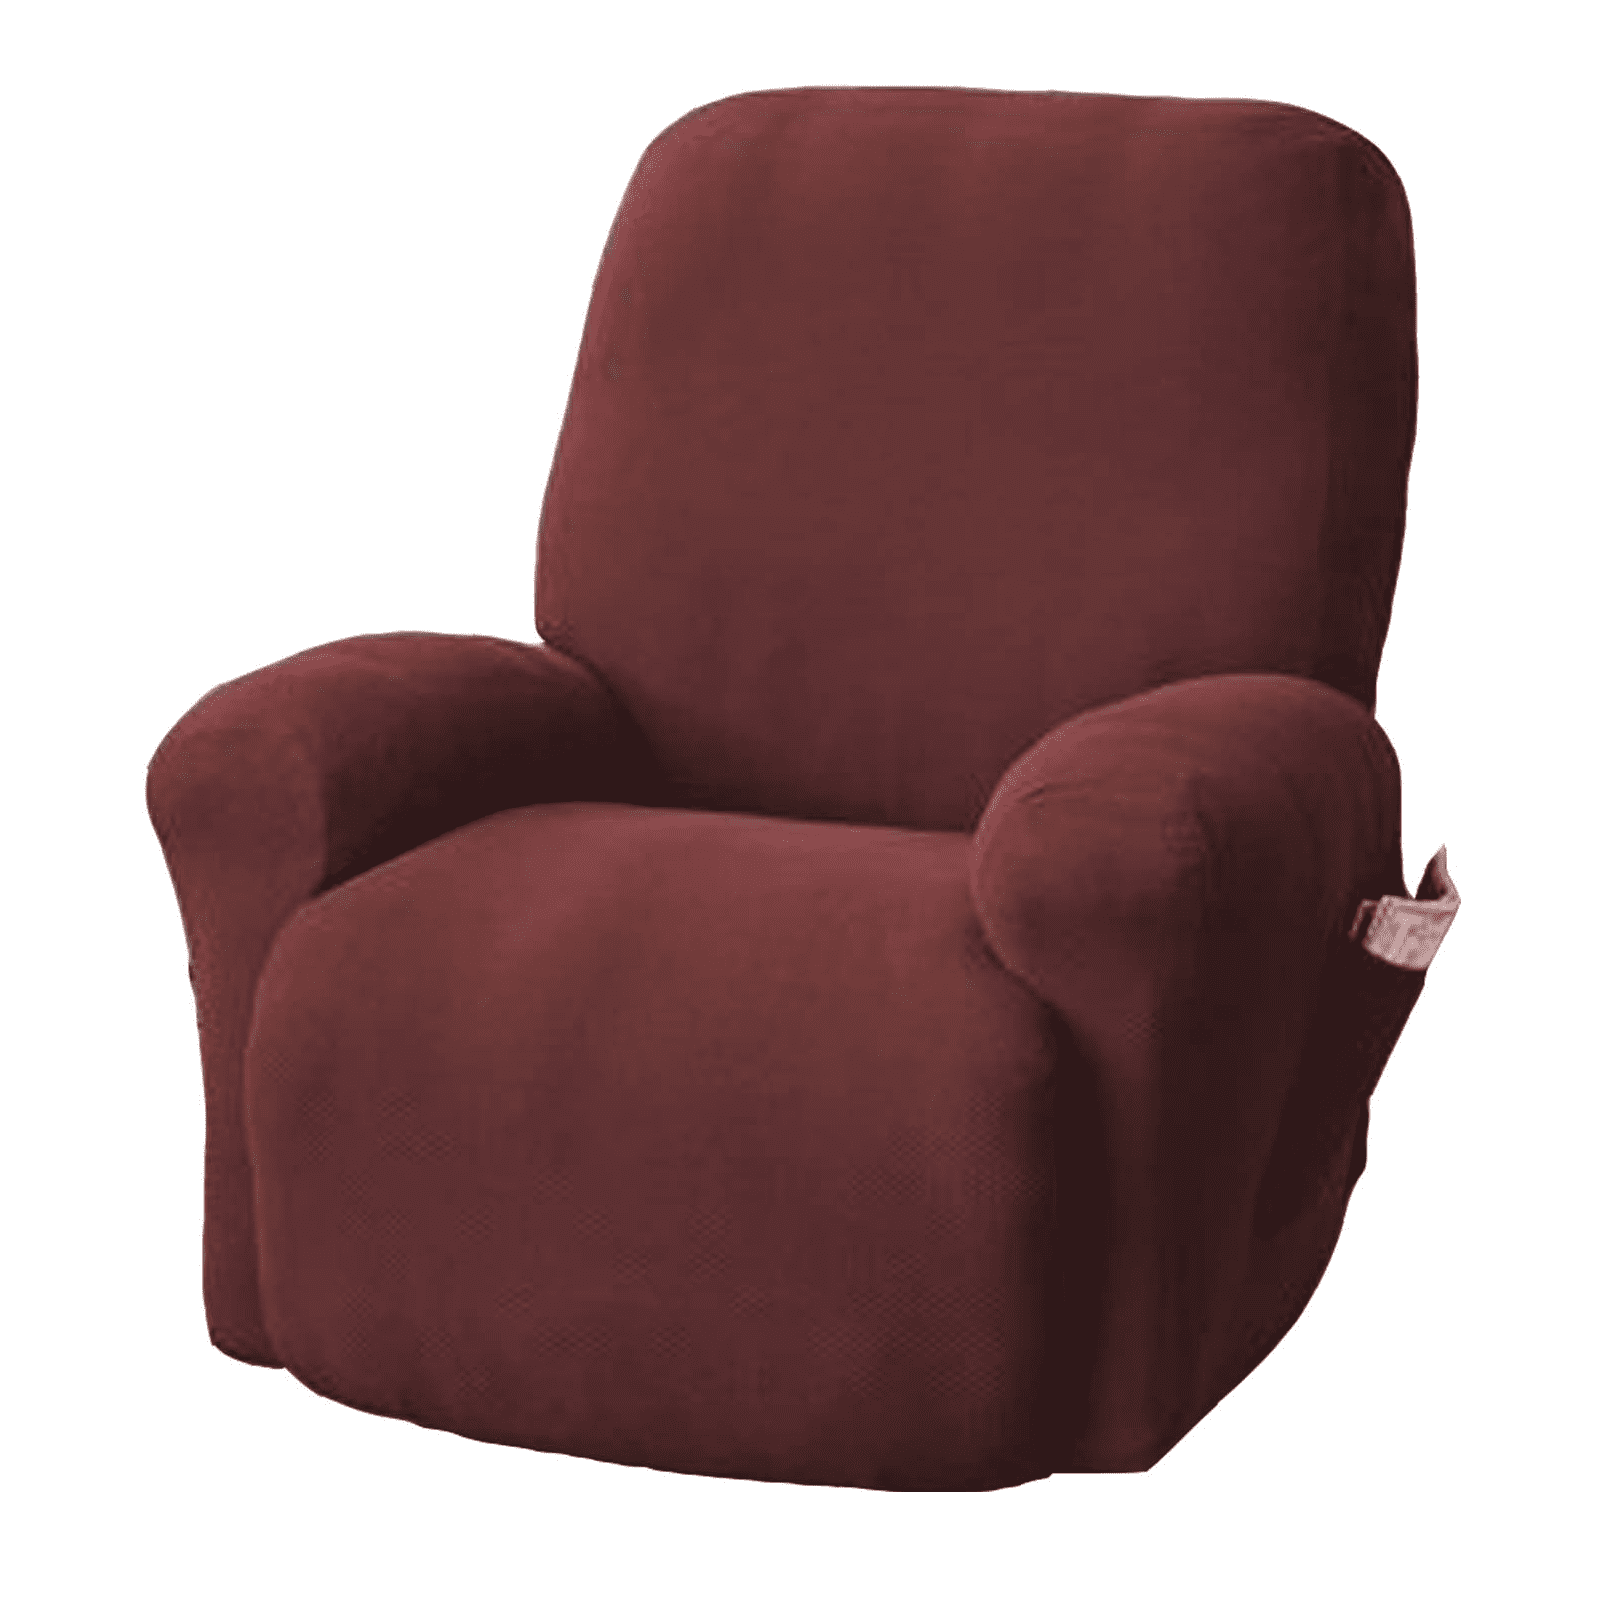 JERSEY "STRETCH" CHAIR COVER SLIPCOVER--LAZY BOY----RED---AVAILABLE IN ALL SIZES 